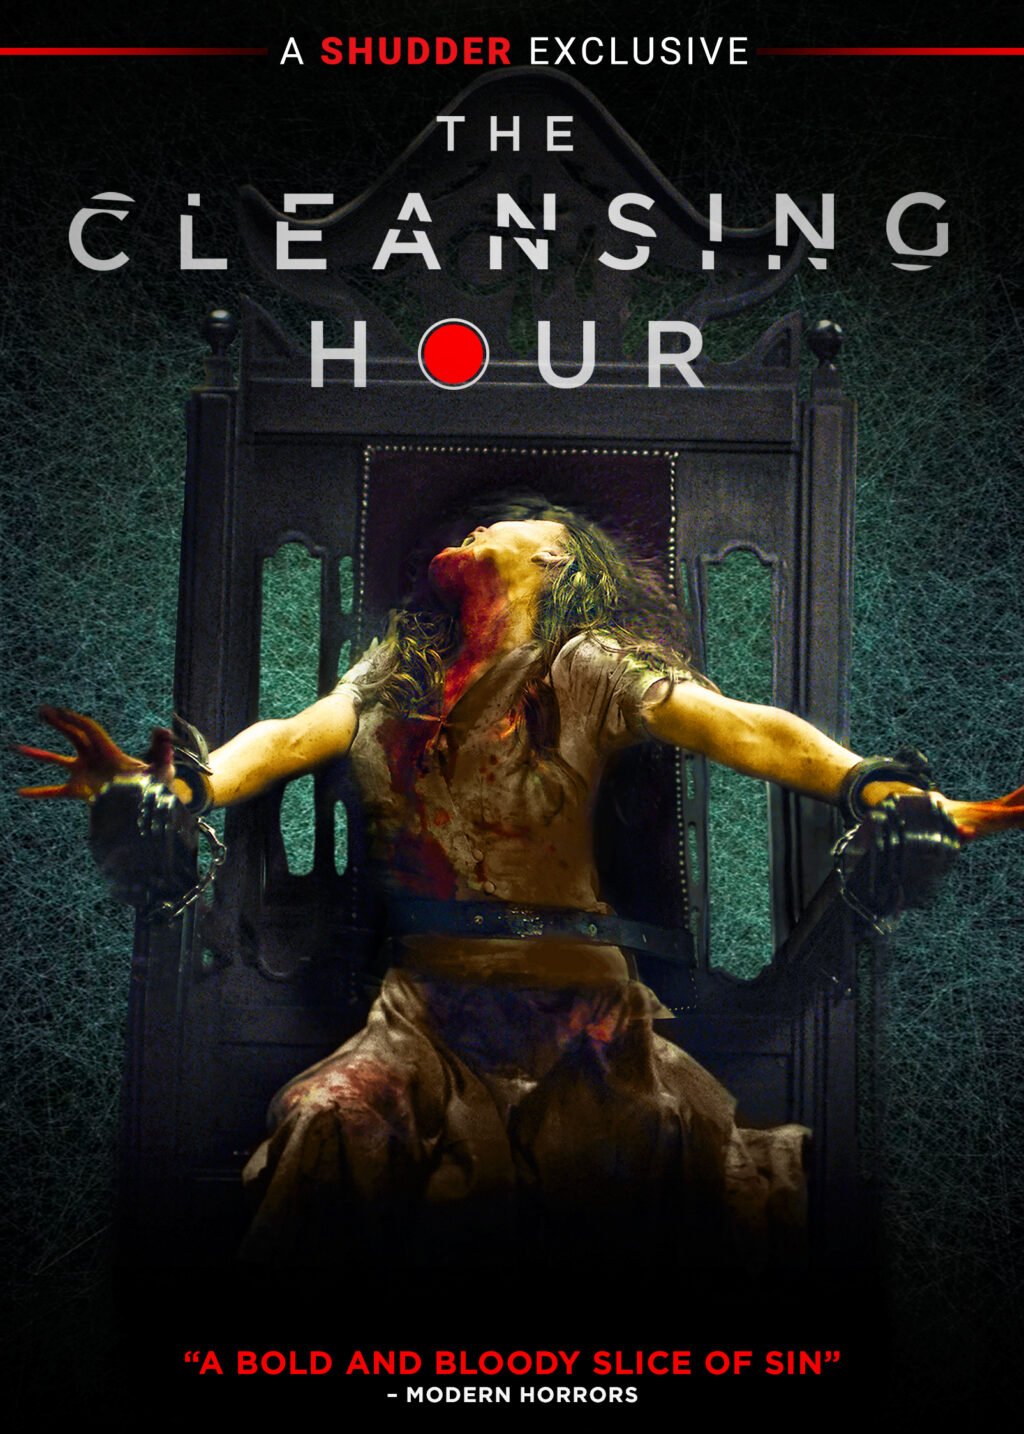 THE CLEANSING HOUR DVD HIC 1024x1434 - THE CLEANSING HOUR Review - This Livestream of an Exorcism Will Begin Shortly...